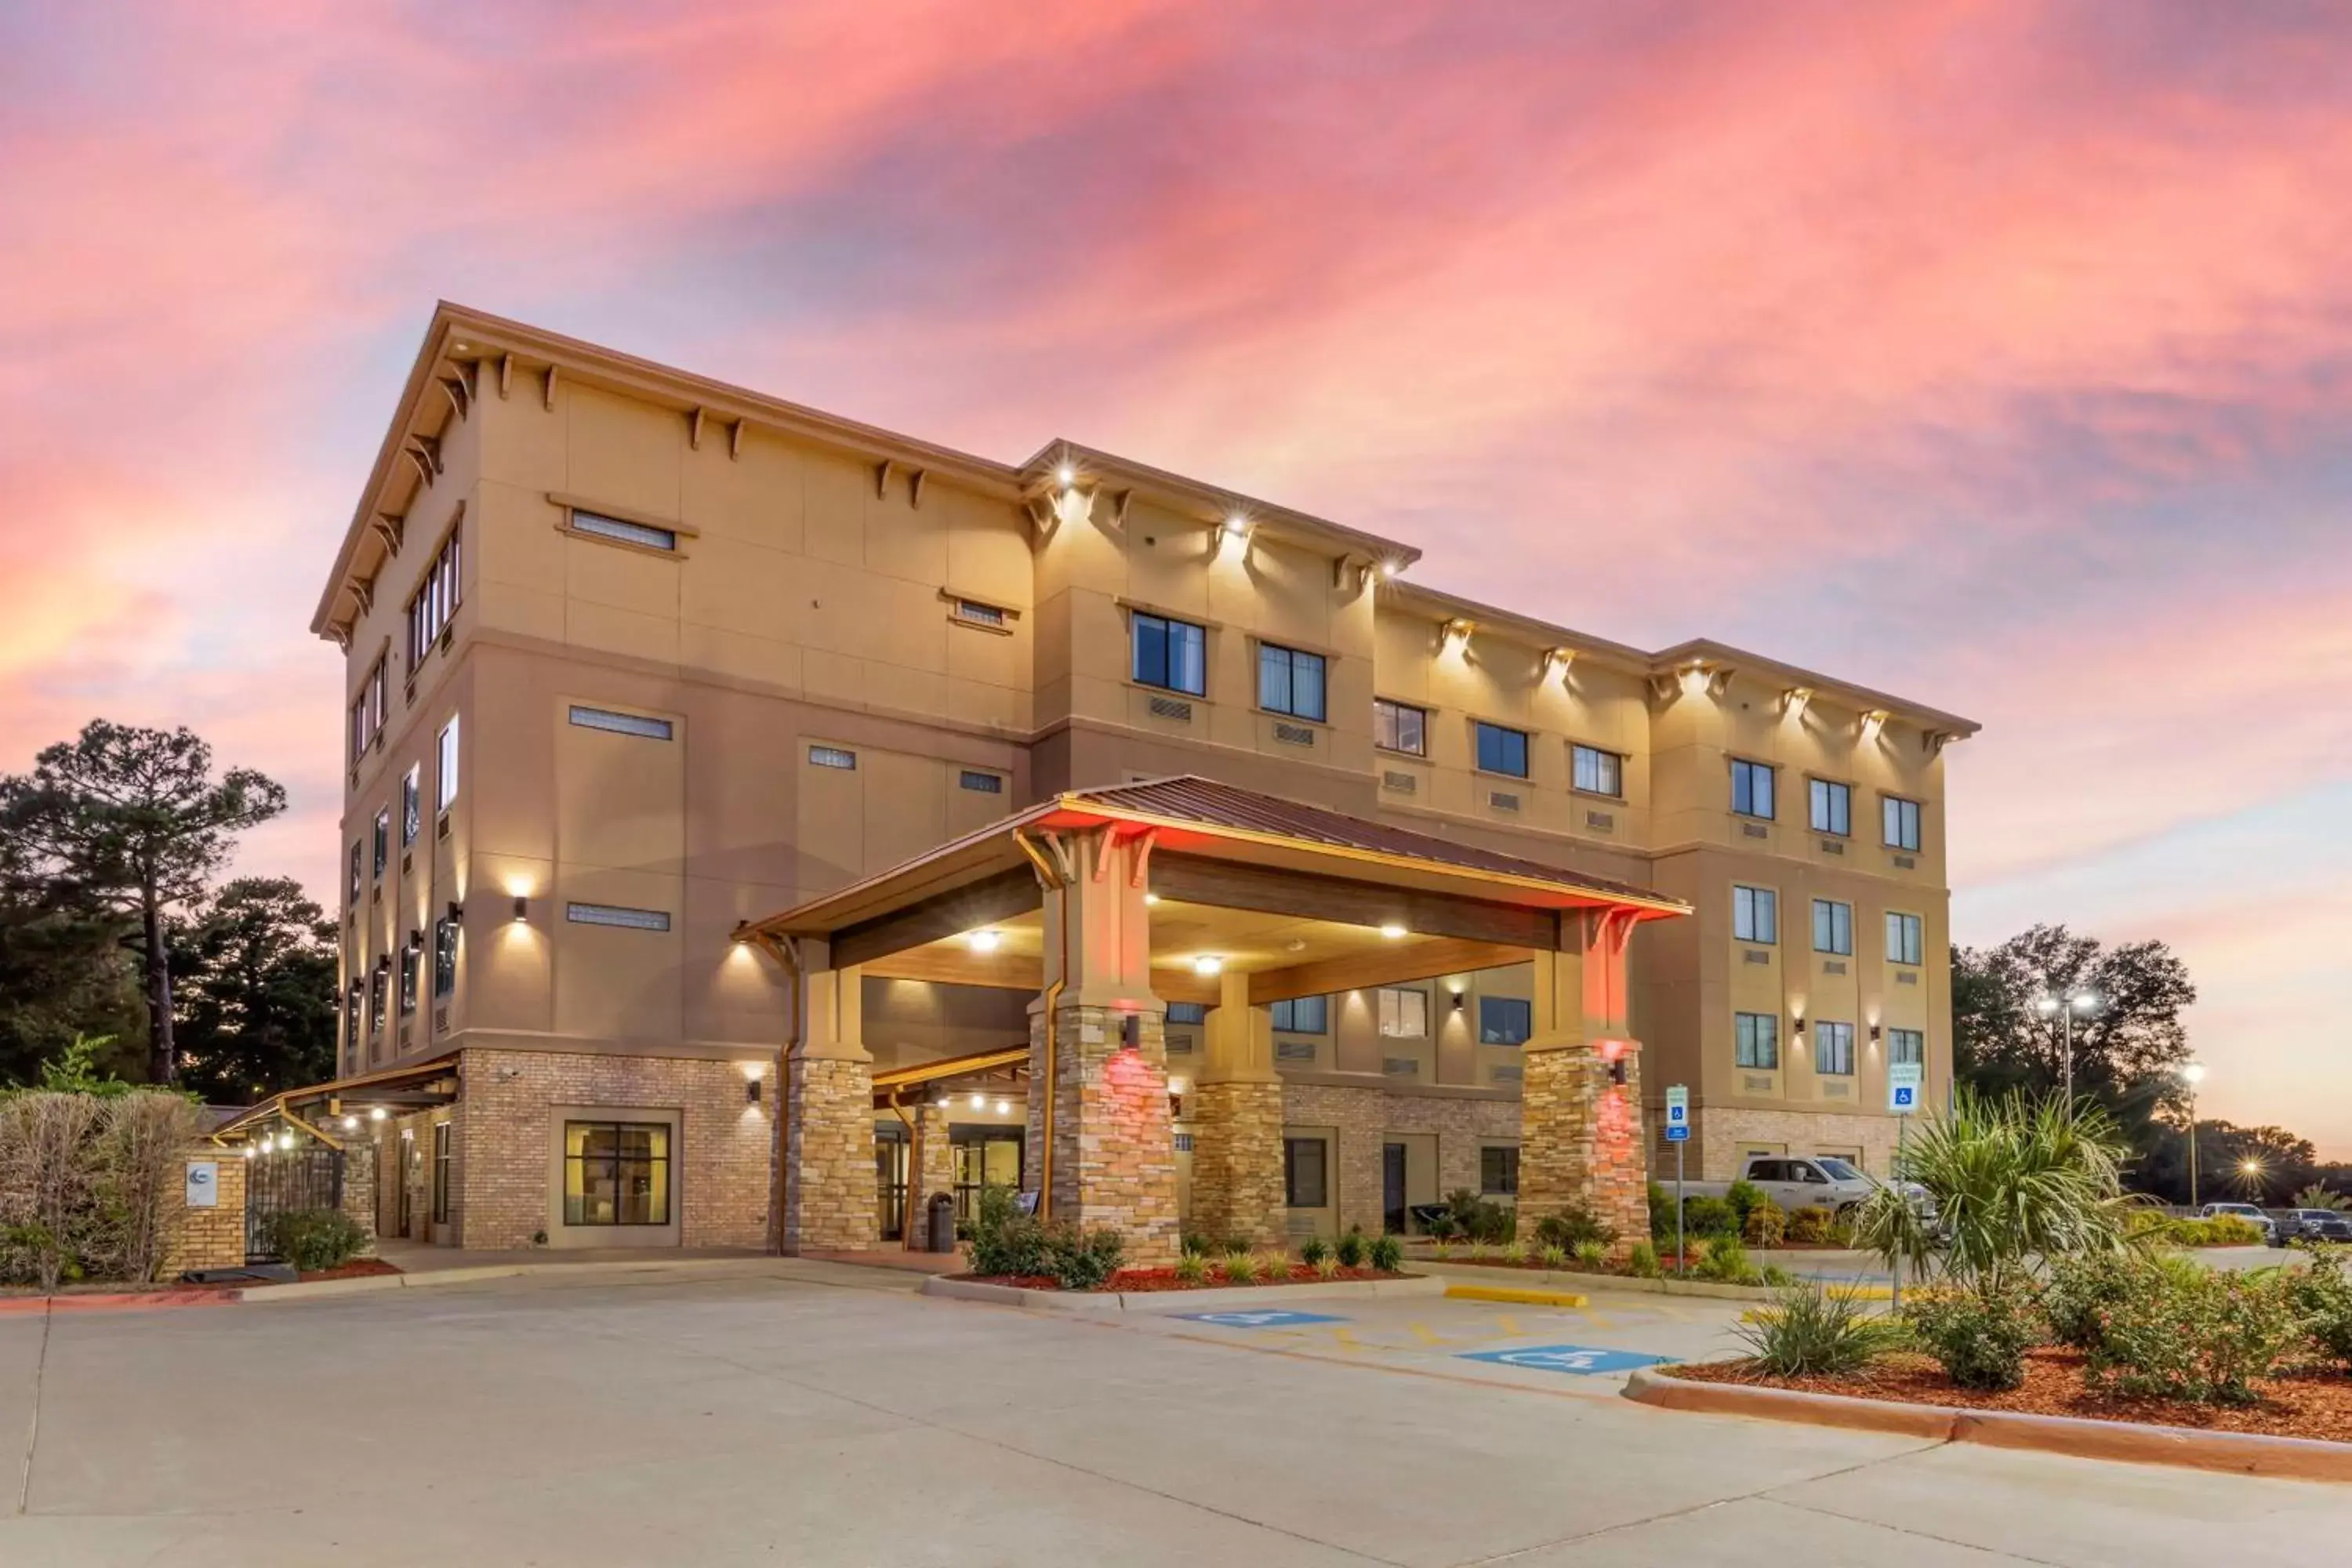 Property Building in Best Western Plus Classic Inn and Suites